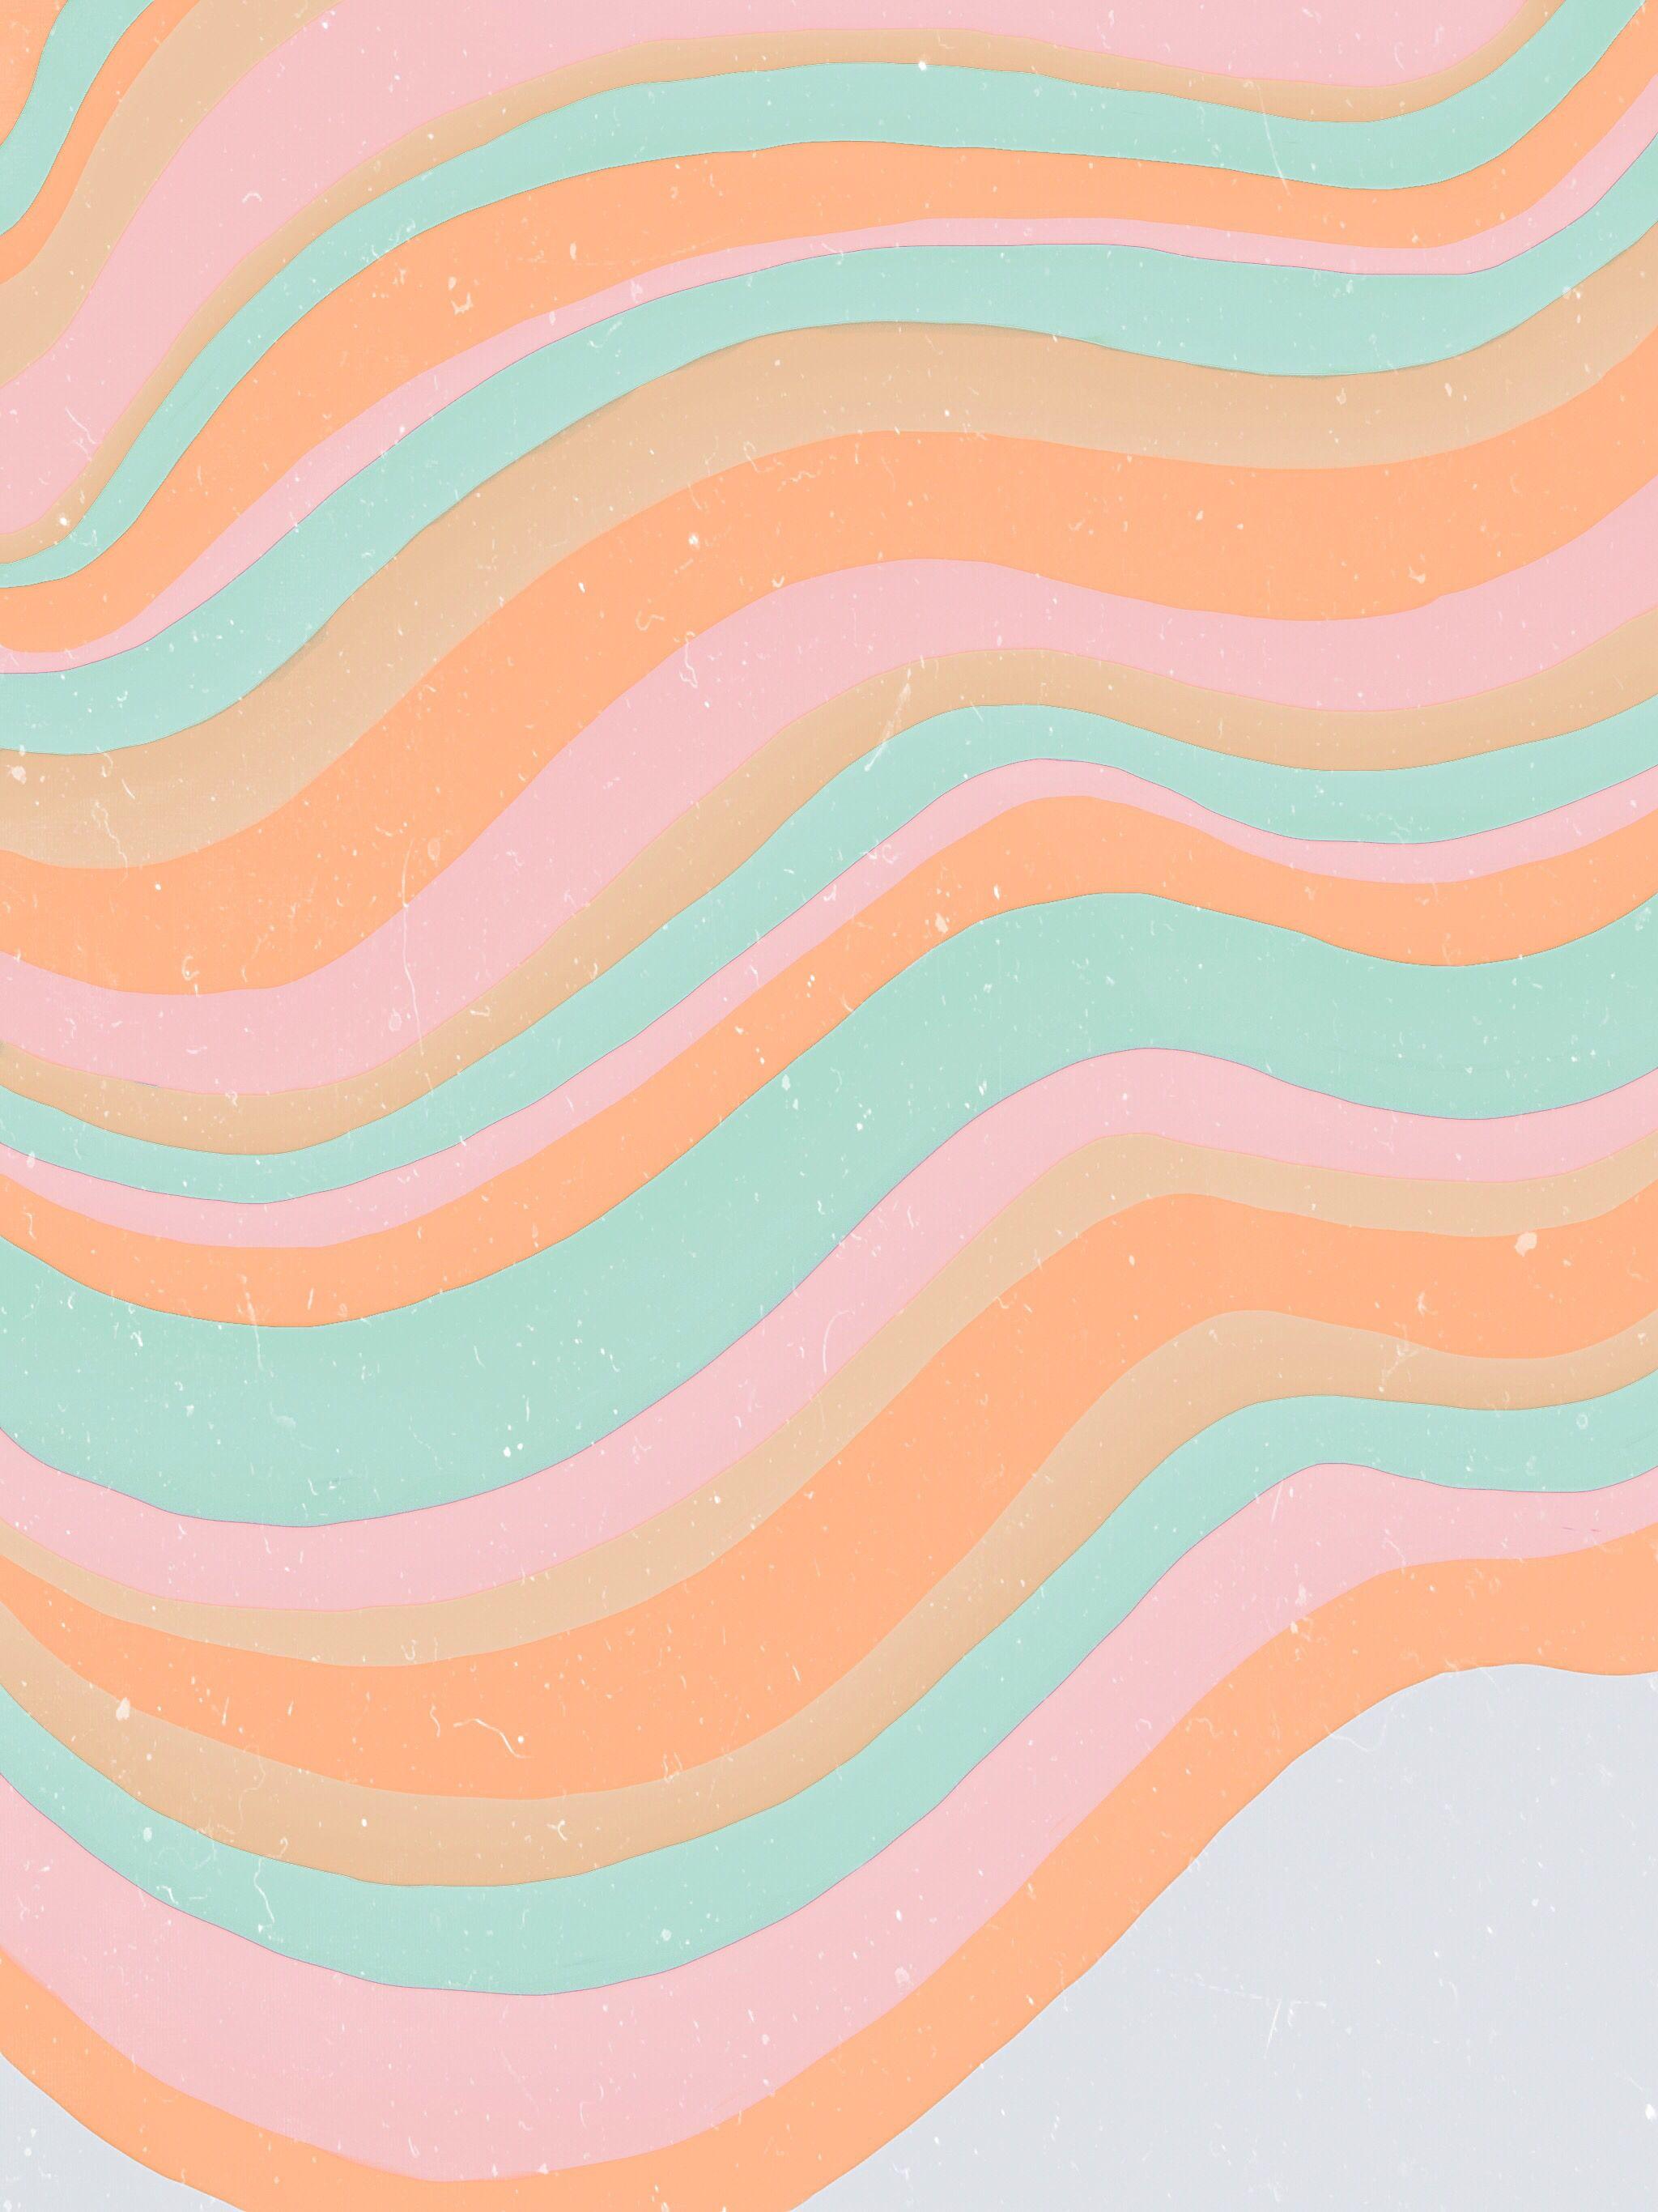 A colorful abstract image of waves - Colorful, VSCO